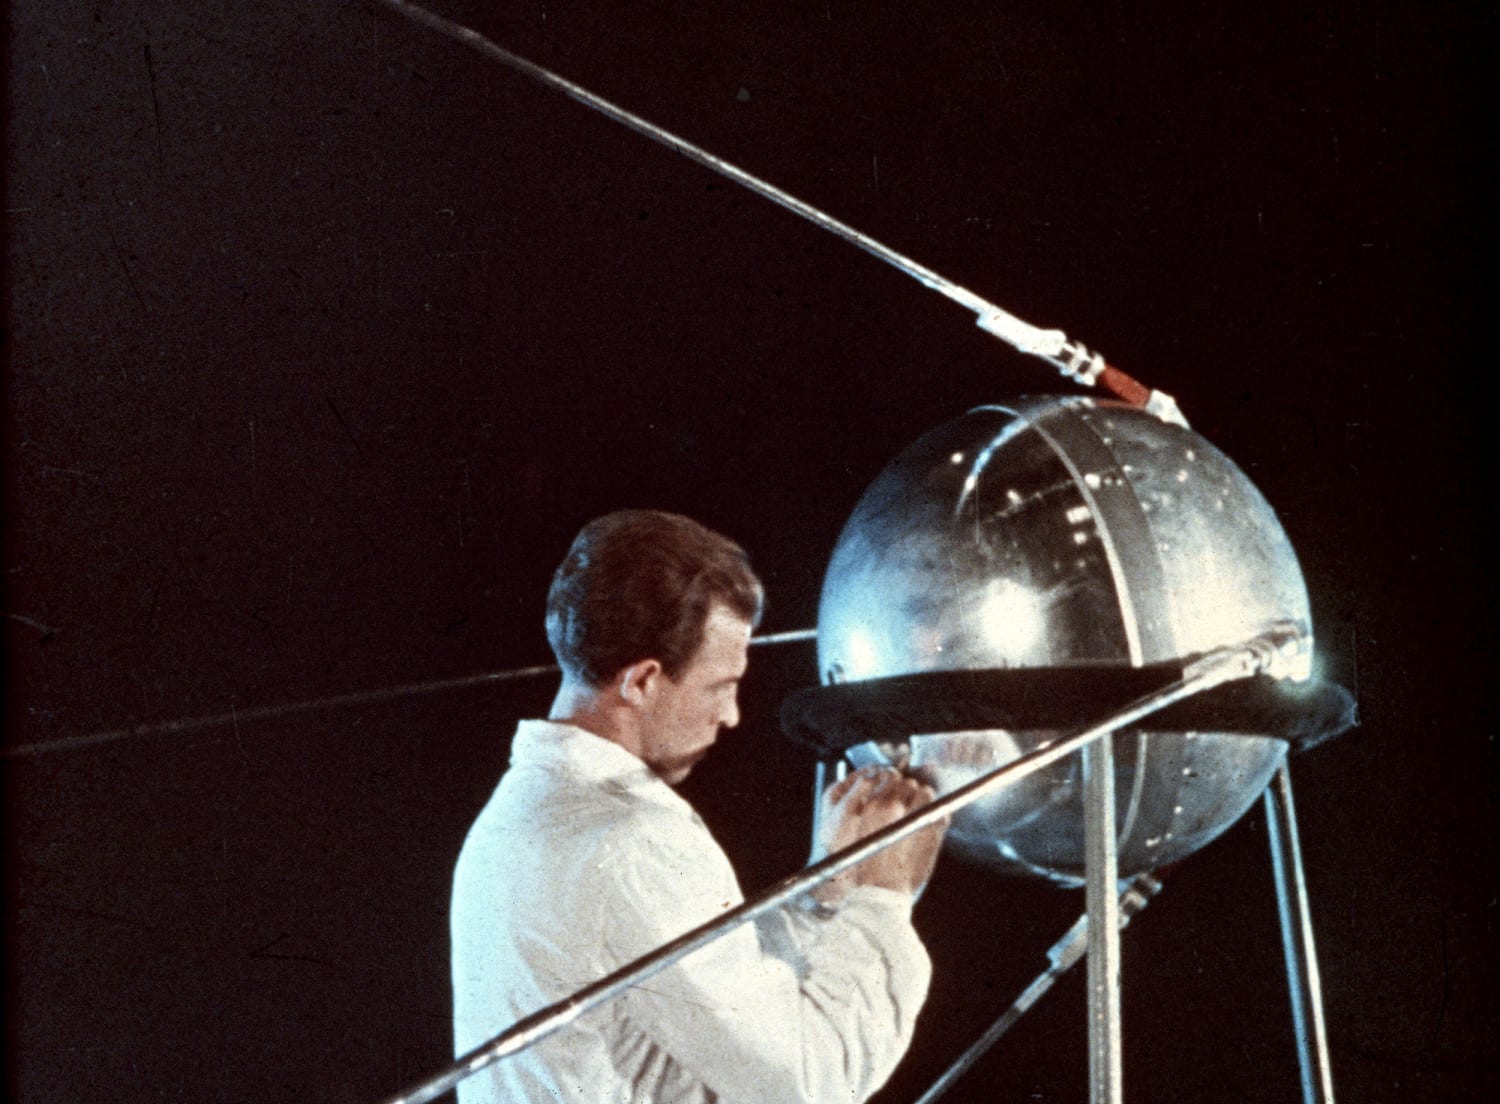 Sputnik Shook the Nation 60 Years Ago. That Could Happen Again